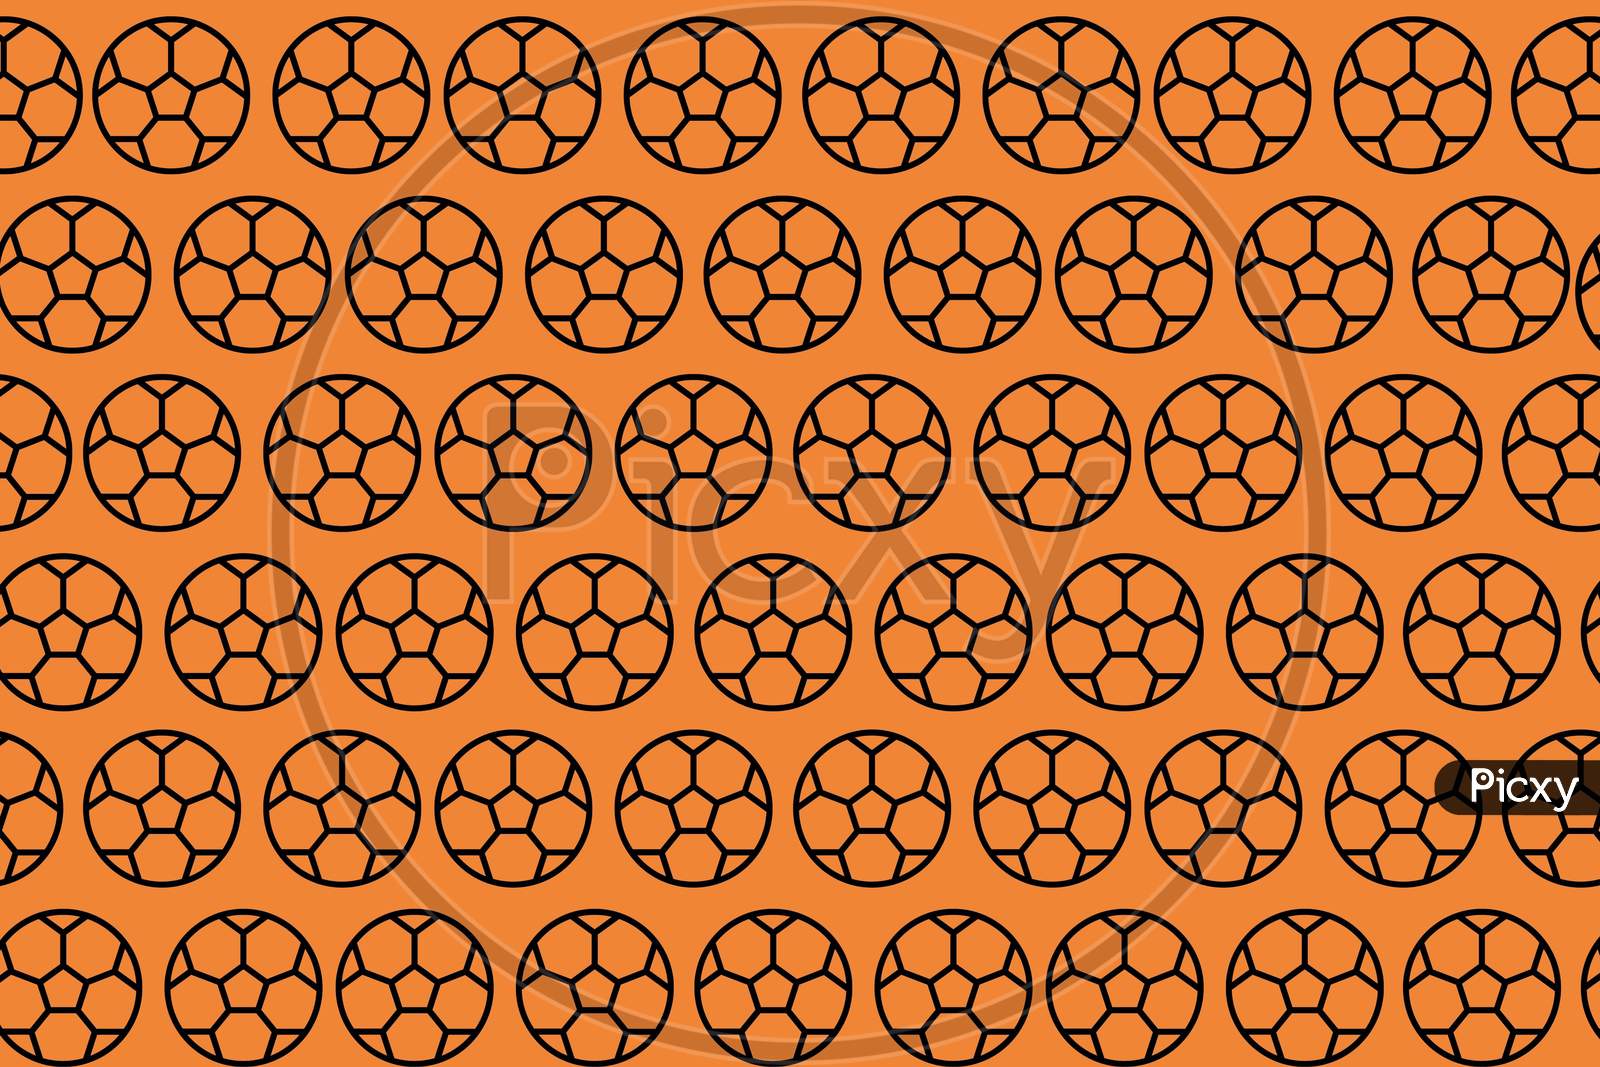 Orange Ball Abstract Or Illustration For Video Background